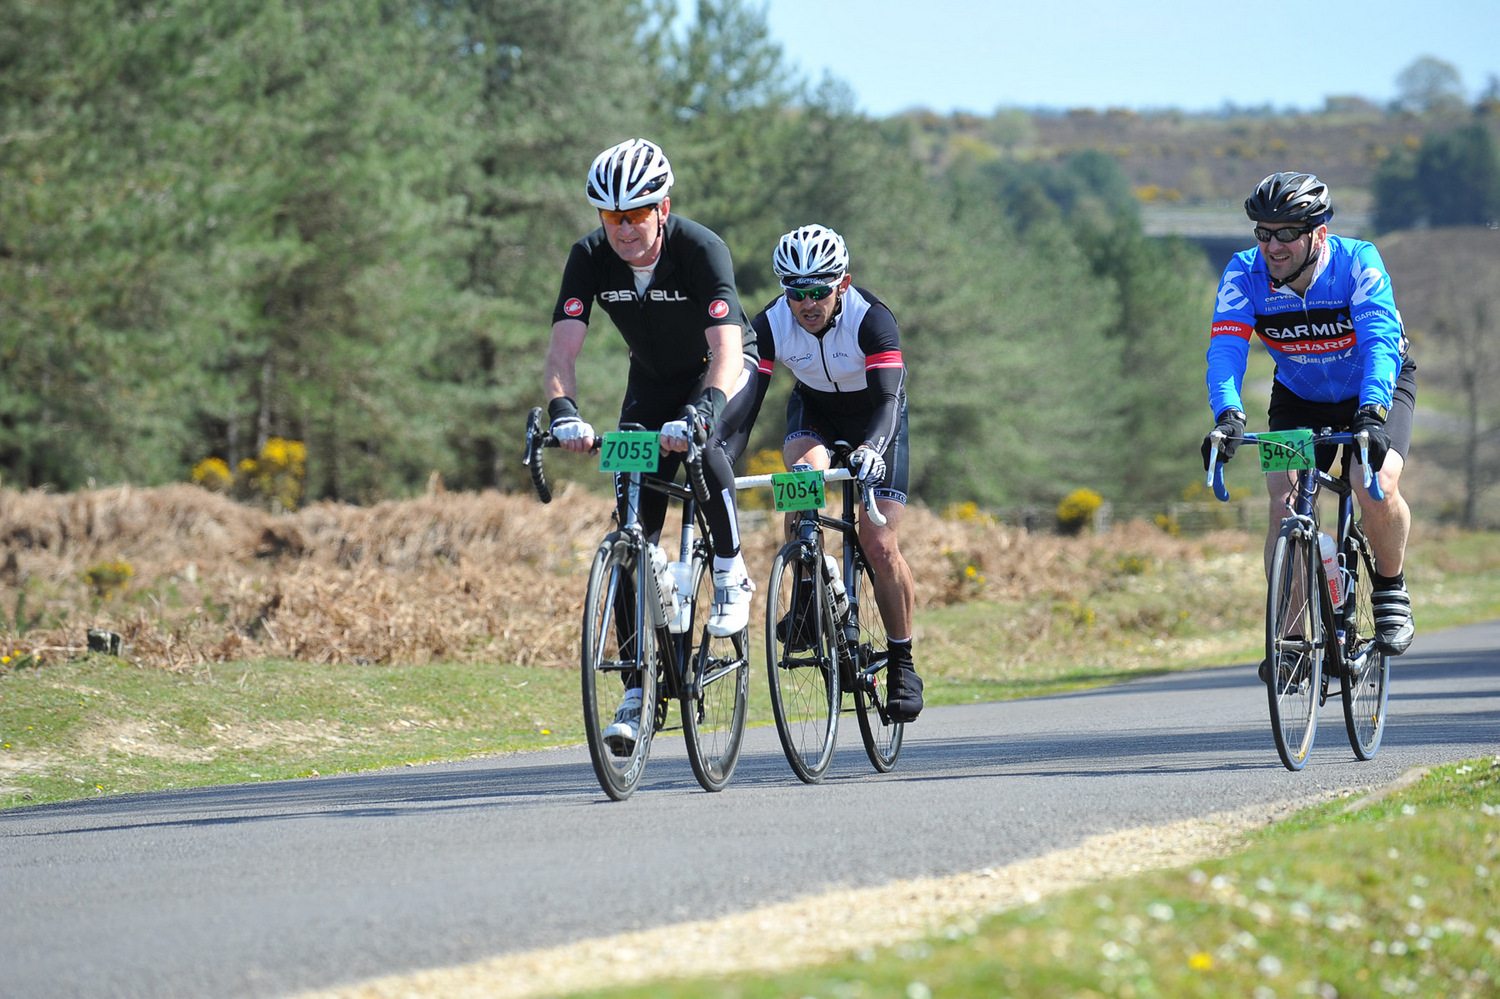 On the 58 Aeros and my Stoemper Taylor riding the New Forest sportive recently